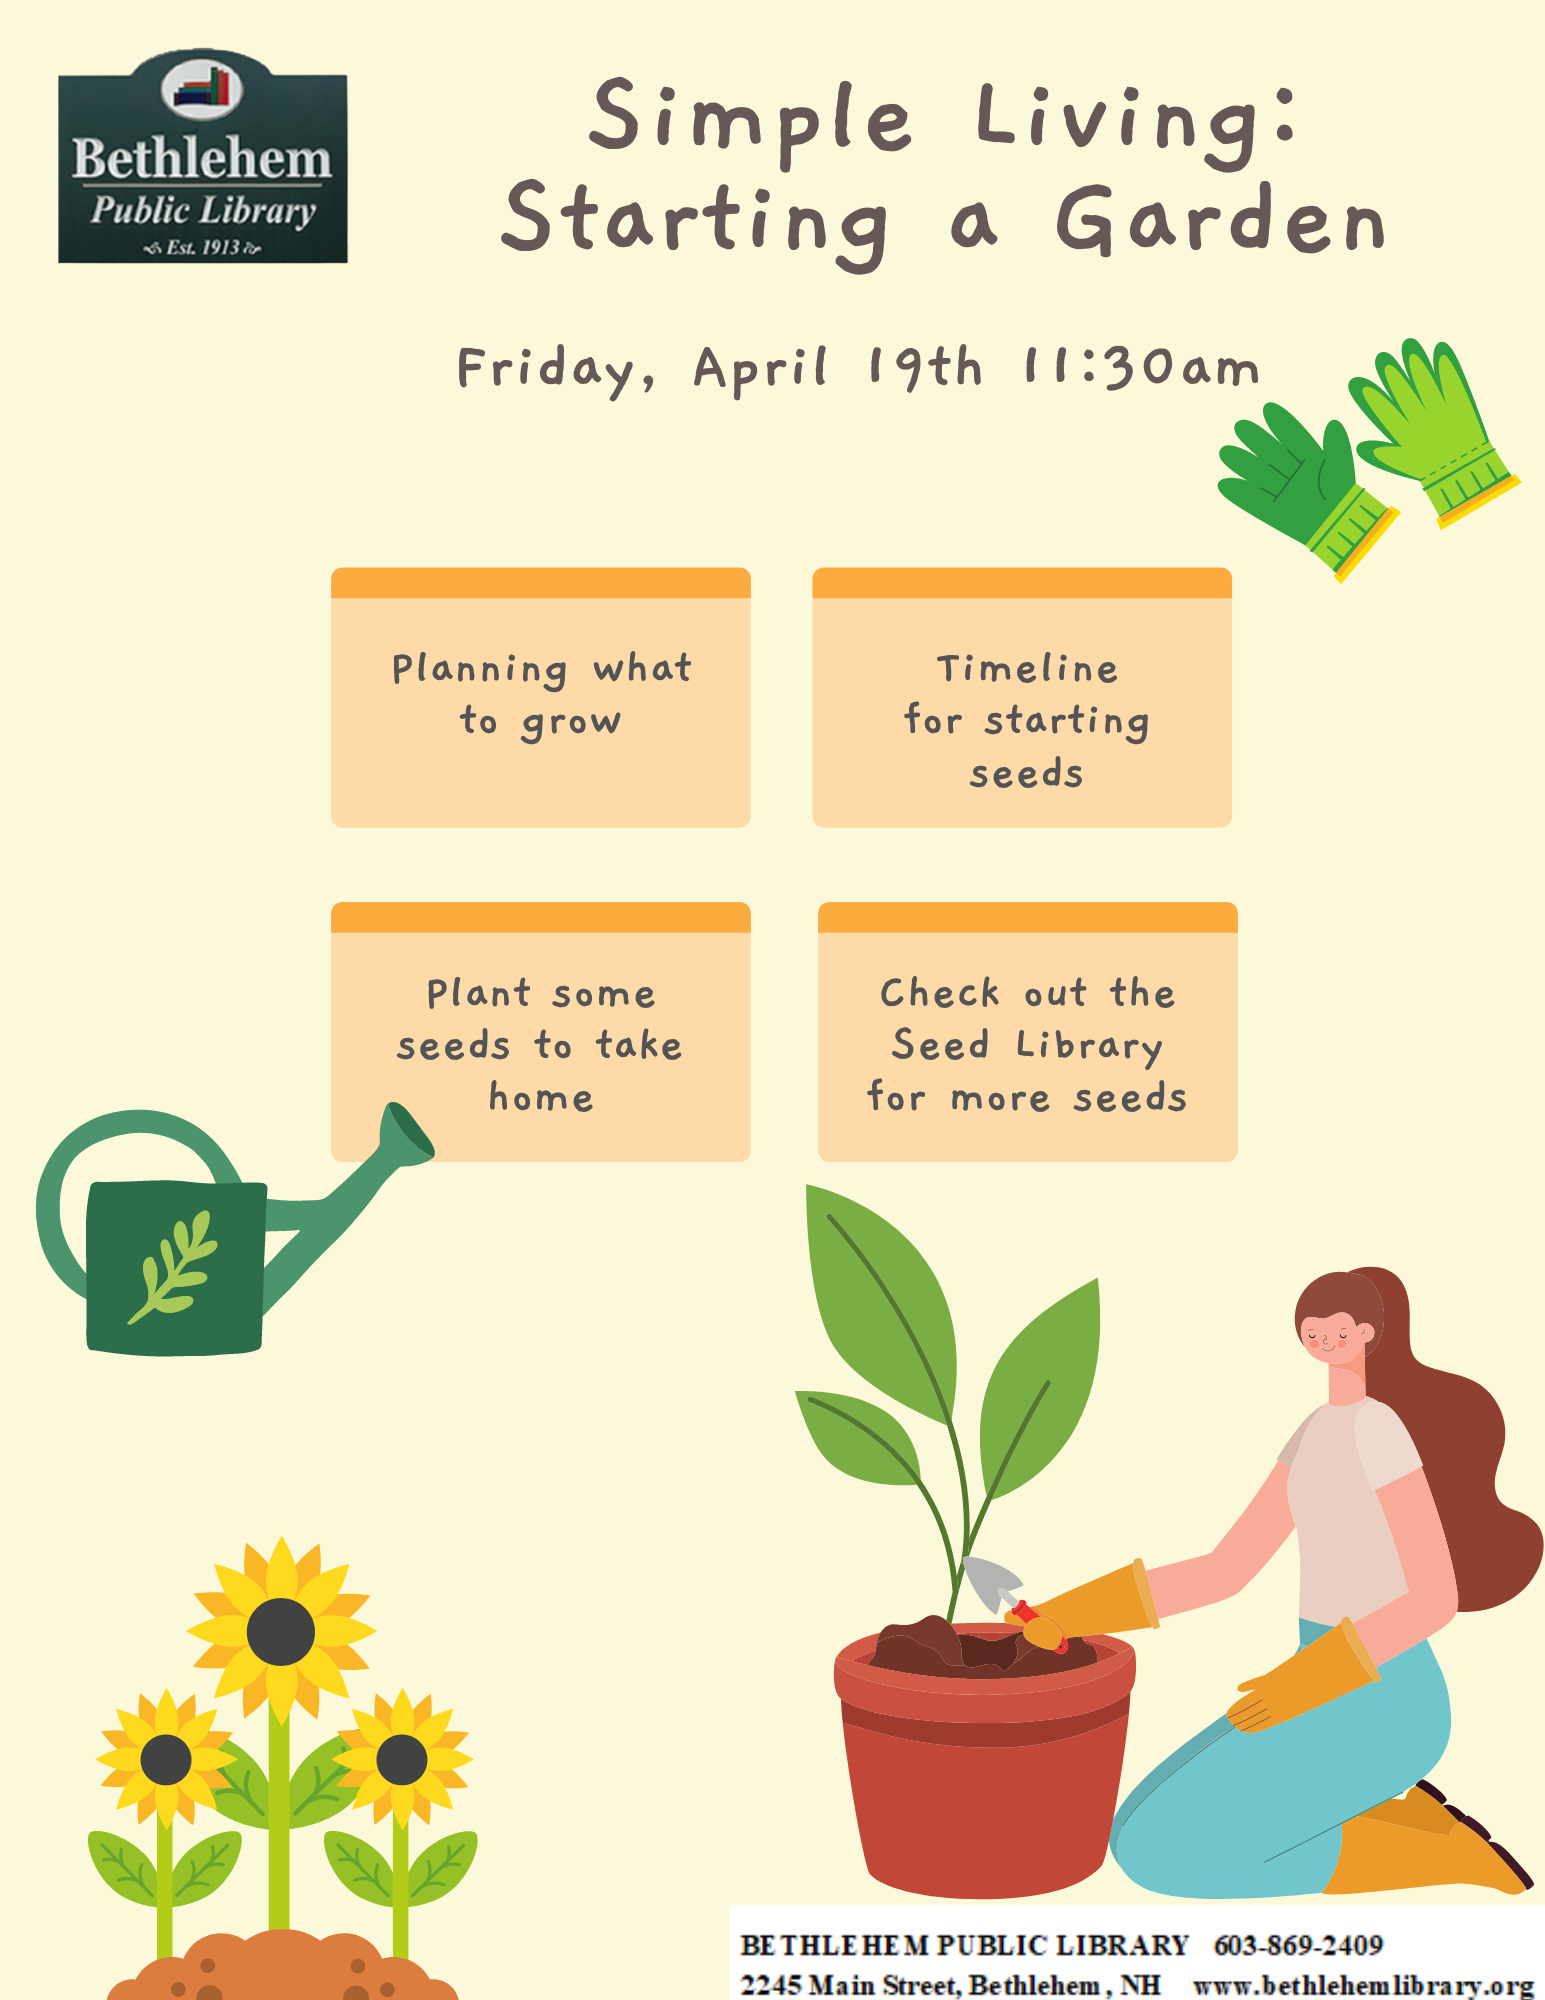 Simple Living: Starting a Garden.  Friday, April 19th 11:30am.  Planning what to grow, timeline for starting seeds, plant some seeds to take home, check out he seed library for more seeds